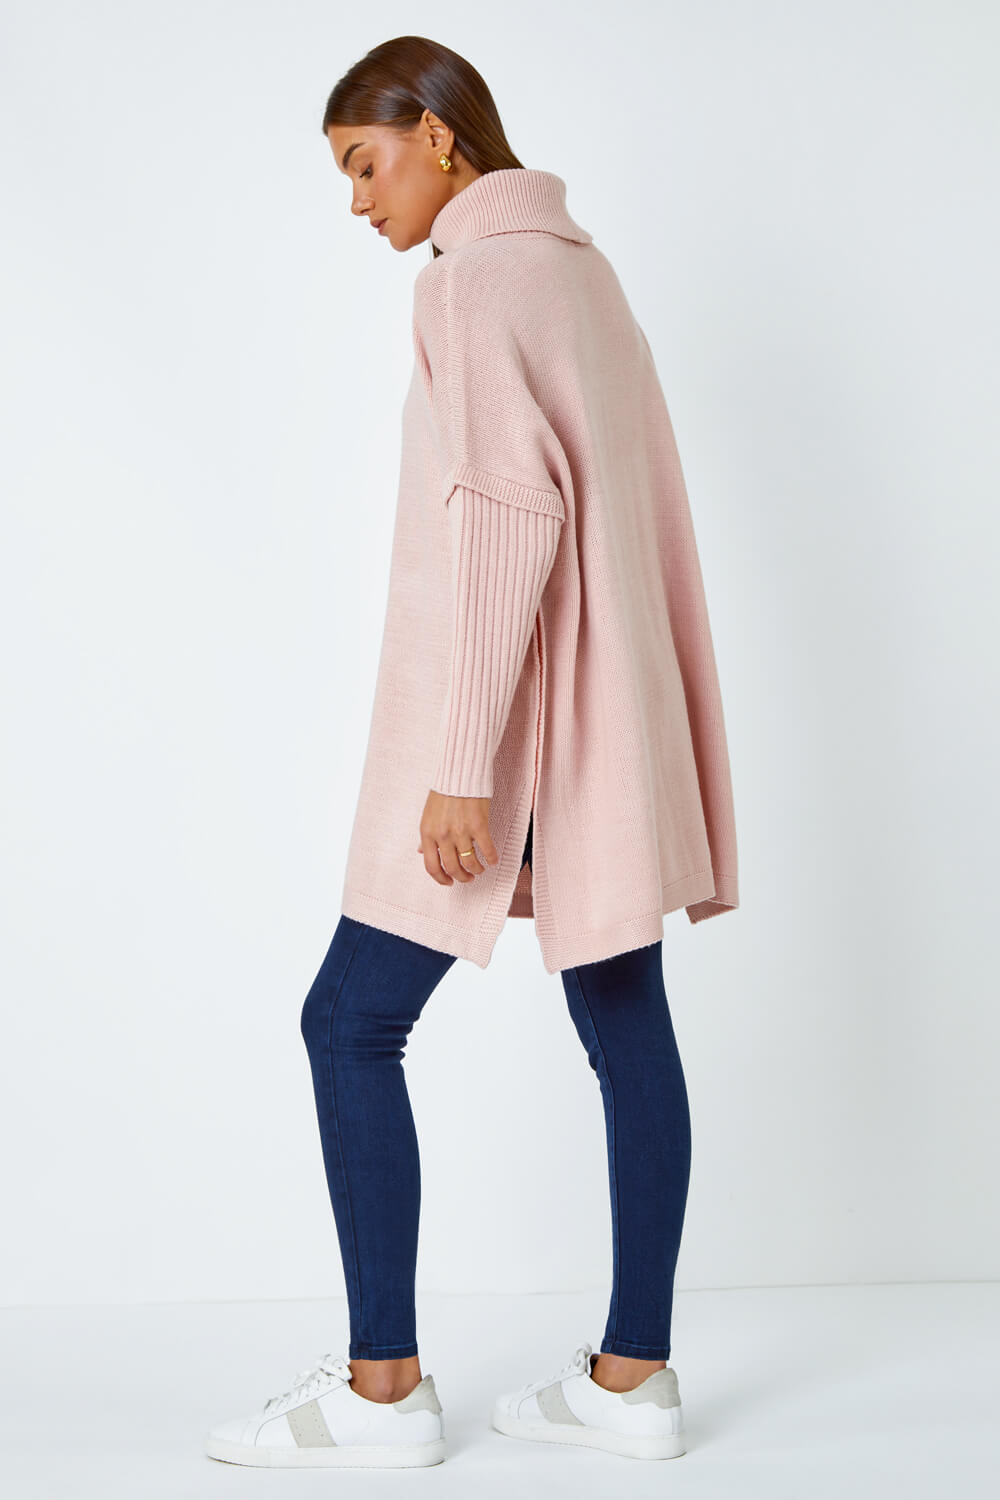 PINK Cable Knit Roll Neck Poncho Jumper, Image 3 of 5